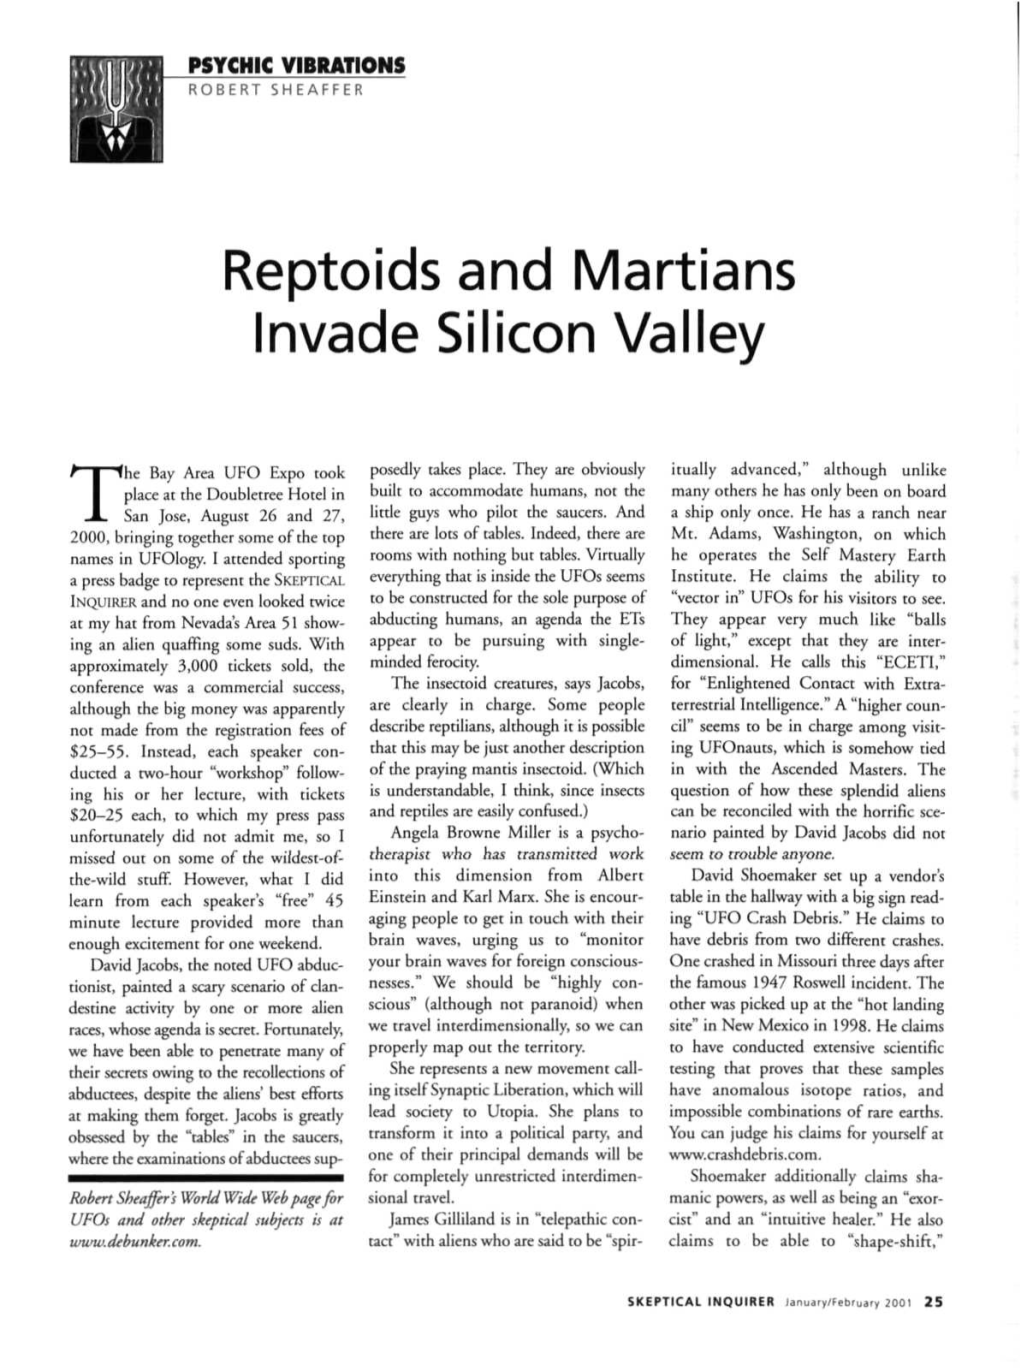 Reptoids and Martians Invade Silicon Valley